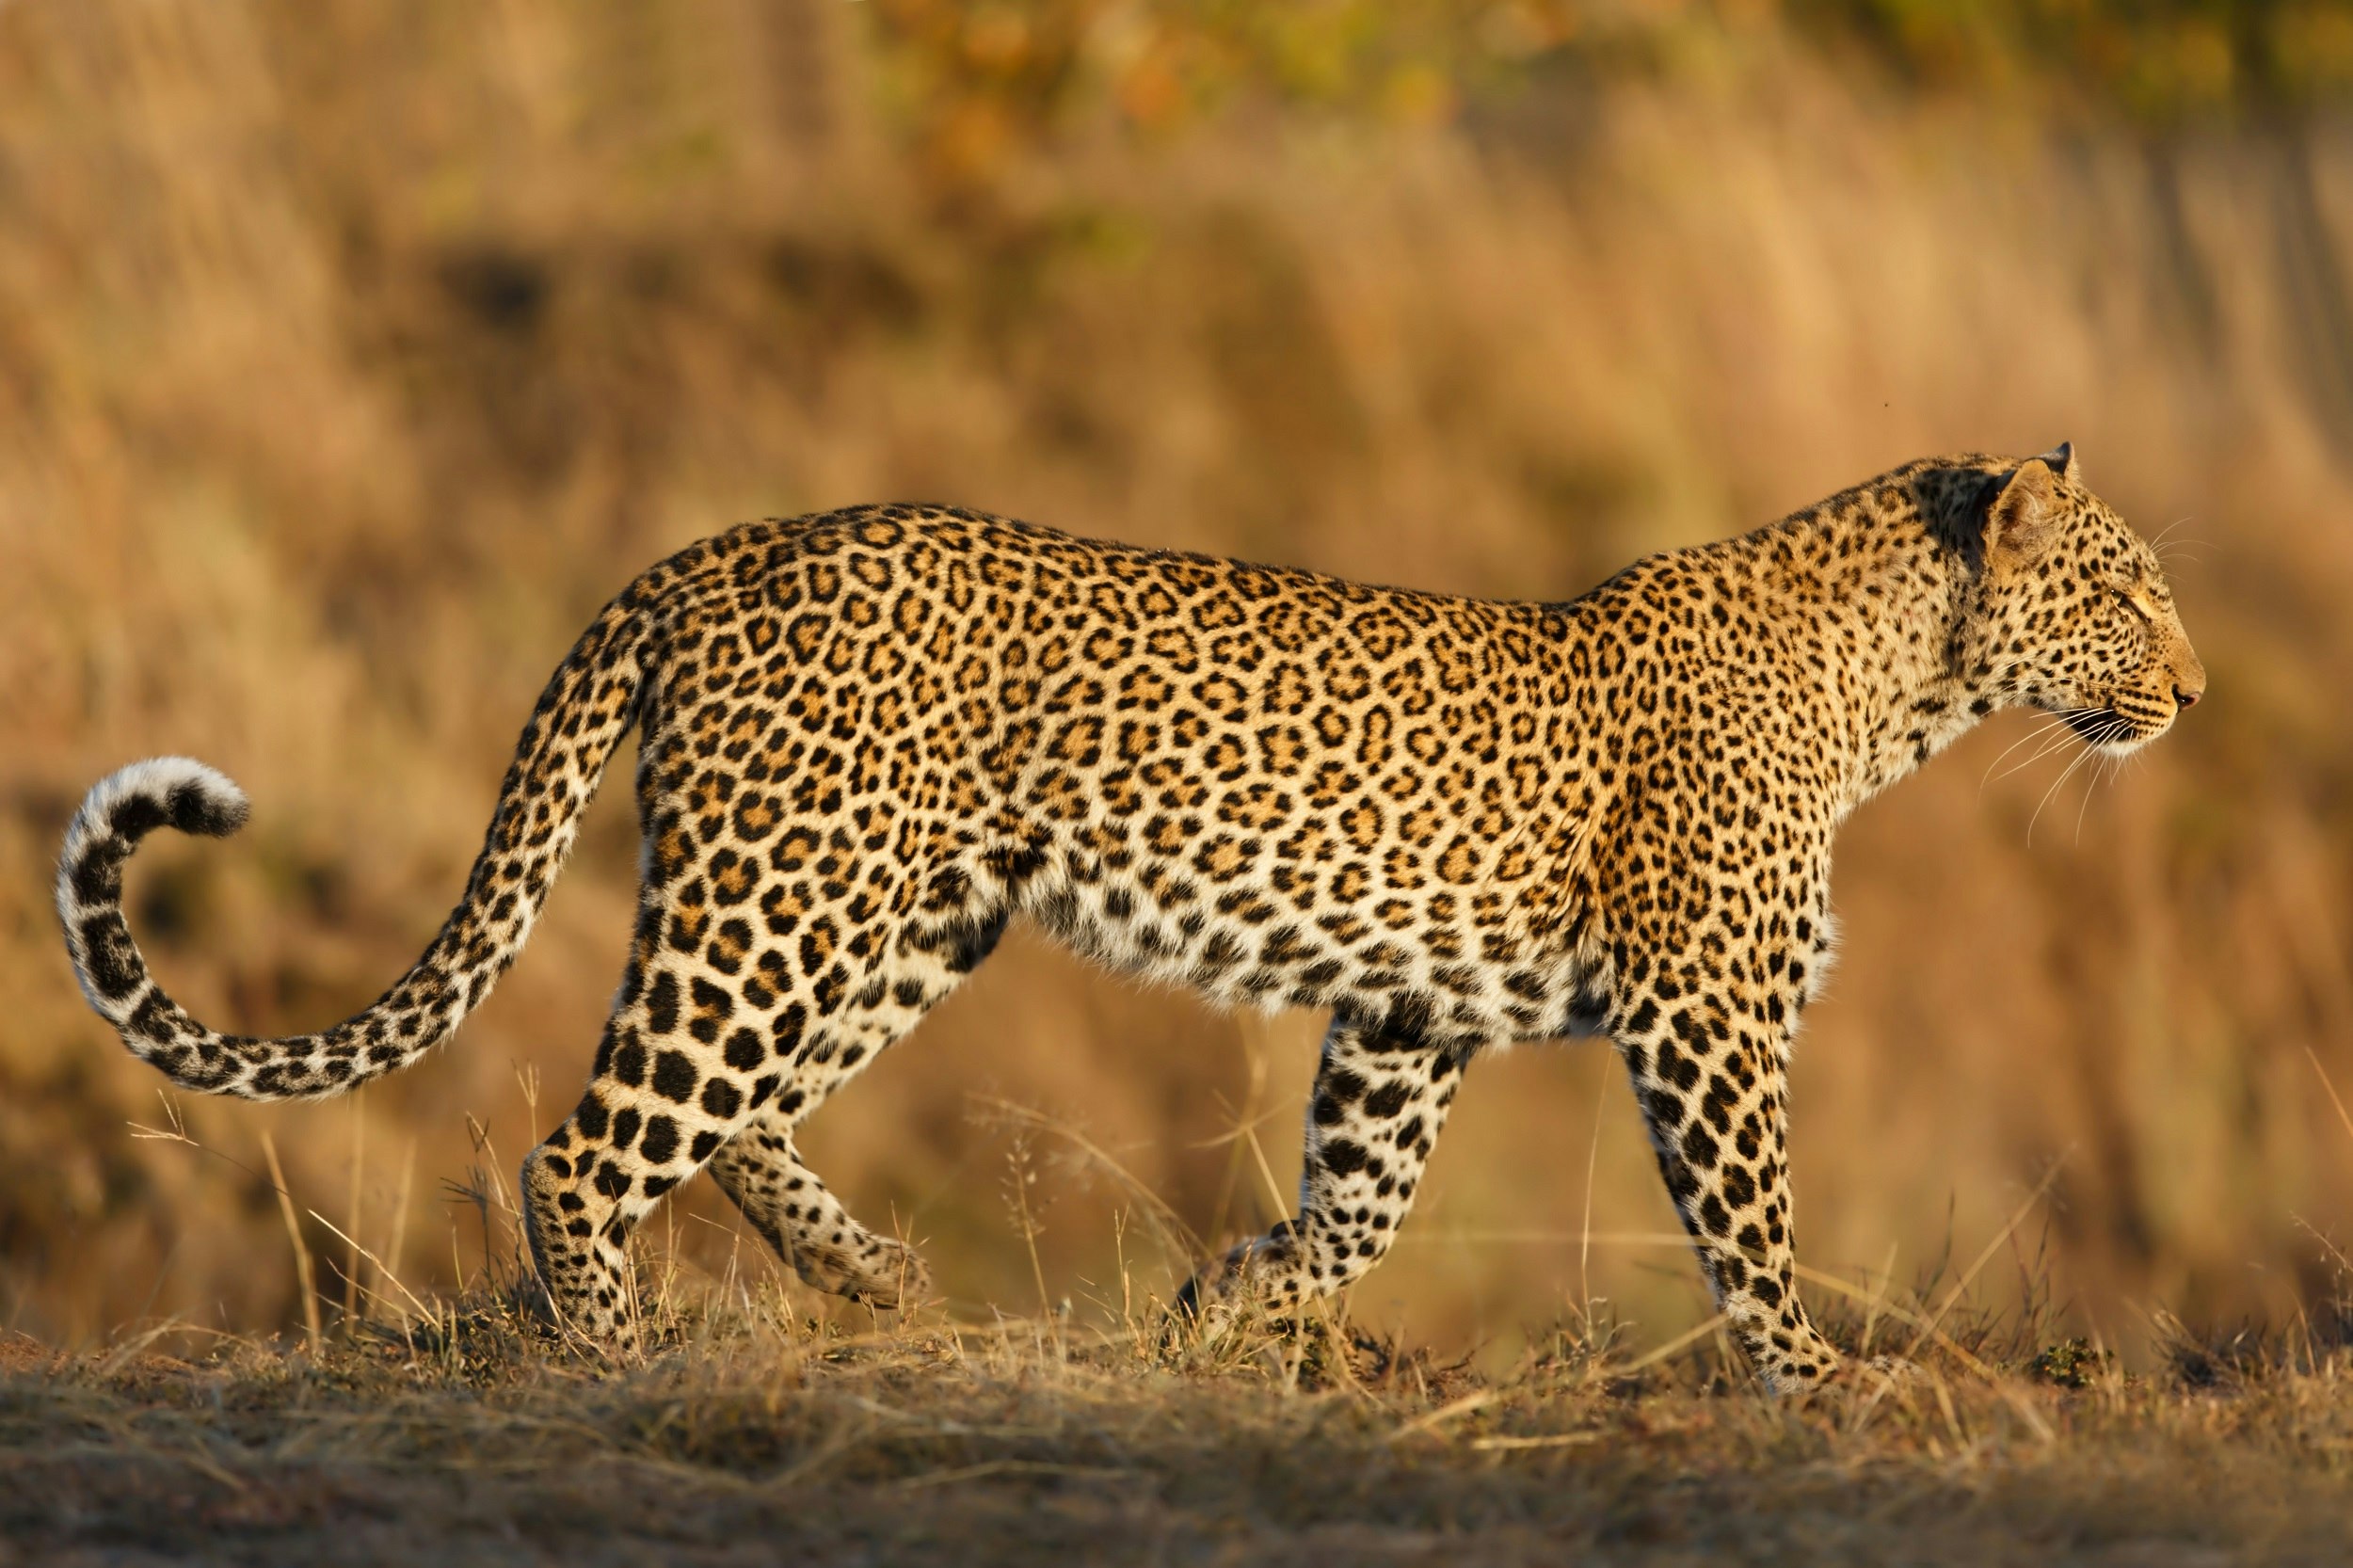 A side angle view of a large leopard walking in the golden grasses of the Masai Mara in Kenya.